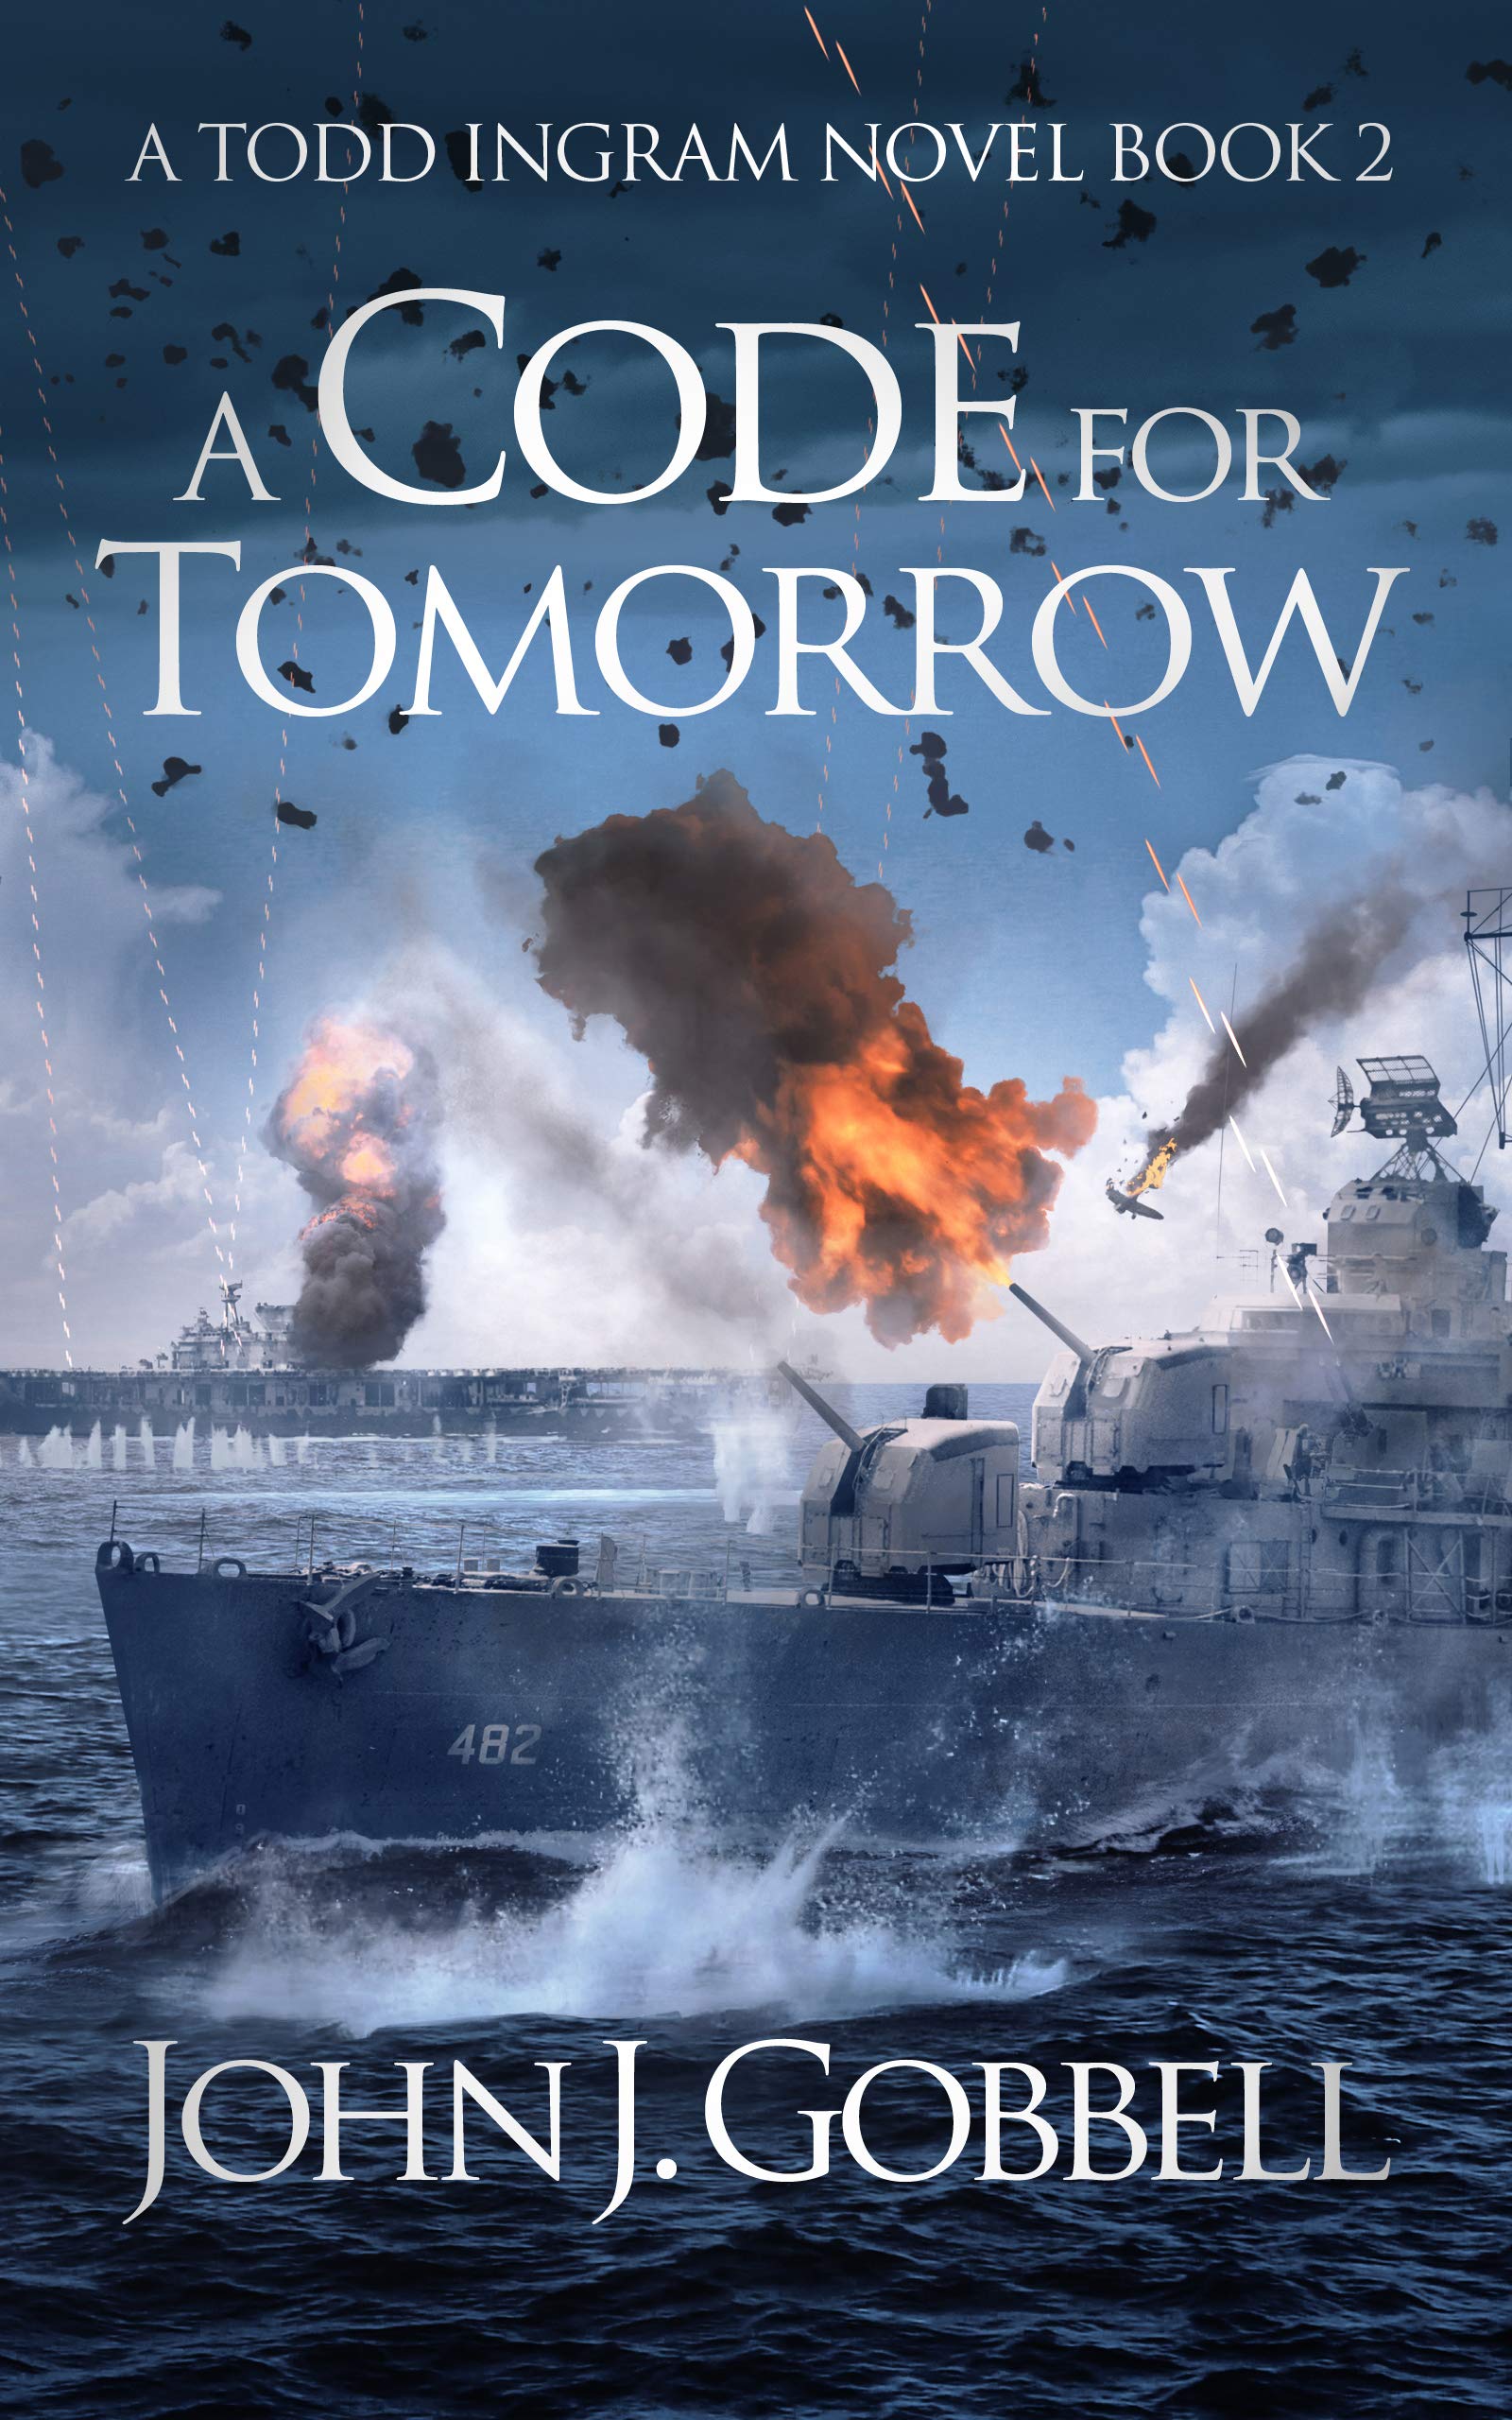 A Code for Tomorrow (The Todd Ingram Series Book 2)